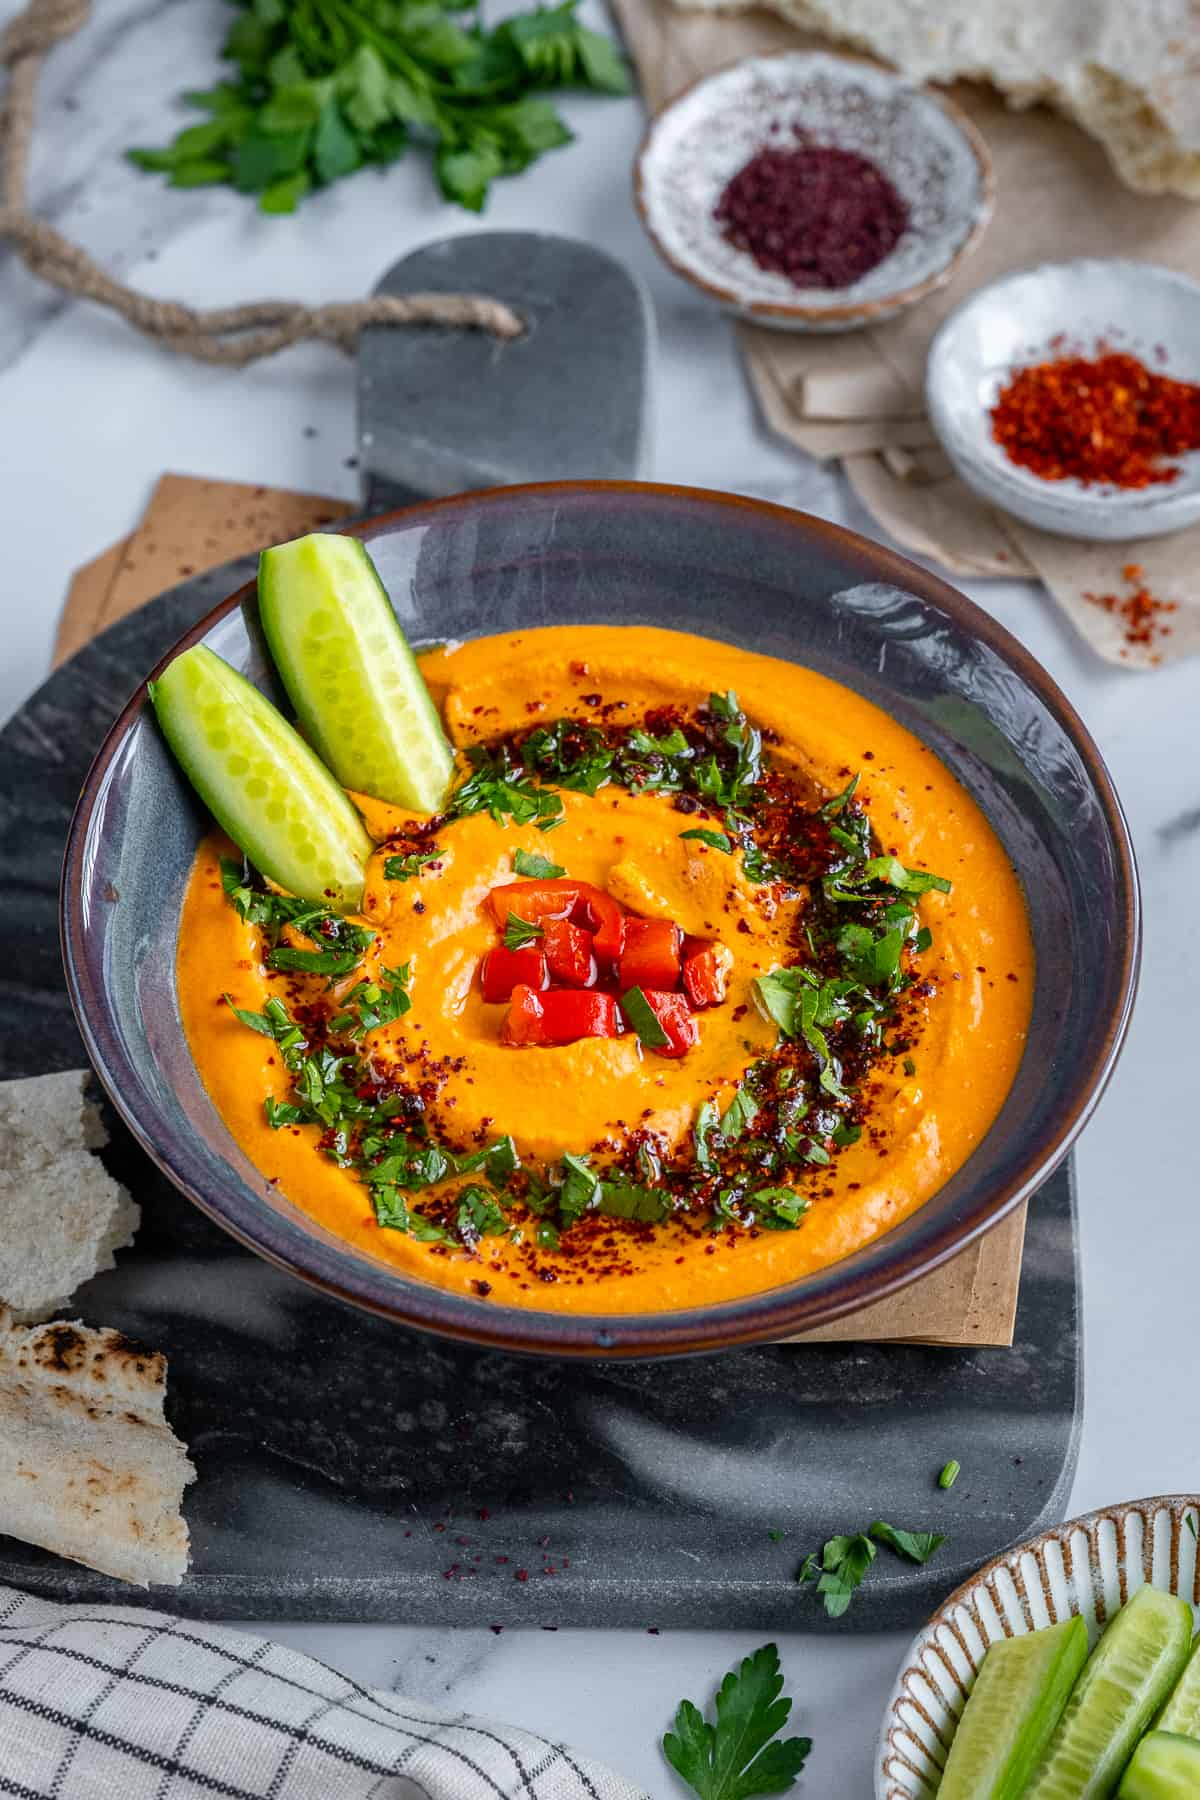 Red pepper hummus served with cucumber sticks, garnished with parsley and spices.